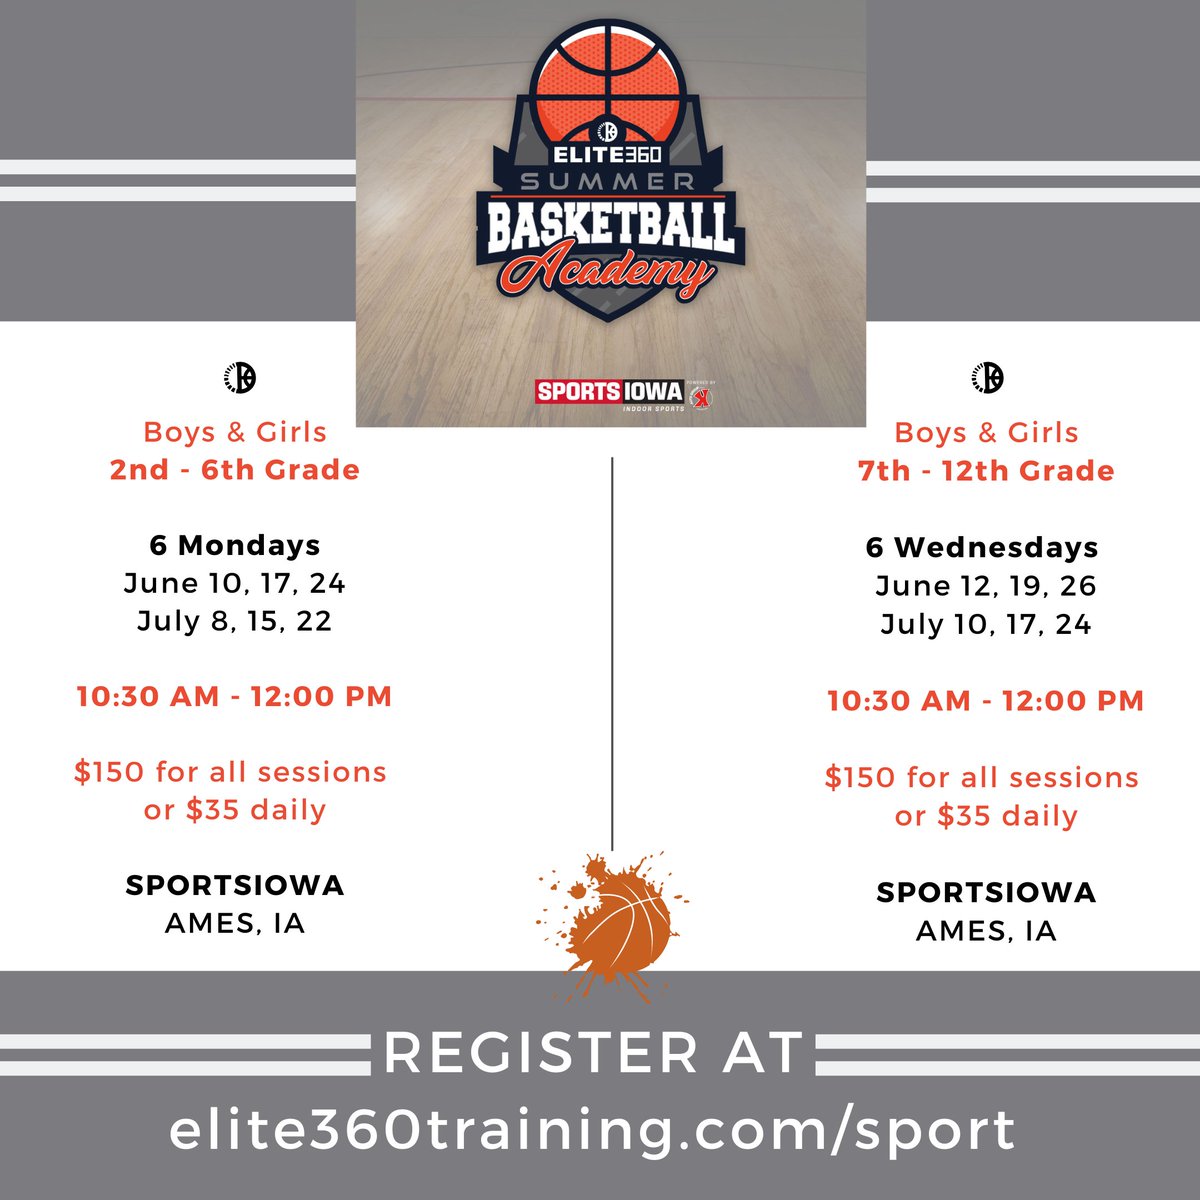 Do you have your spot for our Summer Basketball Academy? 🏀 Camp starts in June but spots are filling up so don't wait to register! Go to elite360training.com/sport and sign up before it is too late.